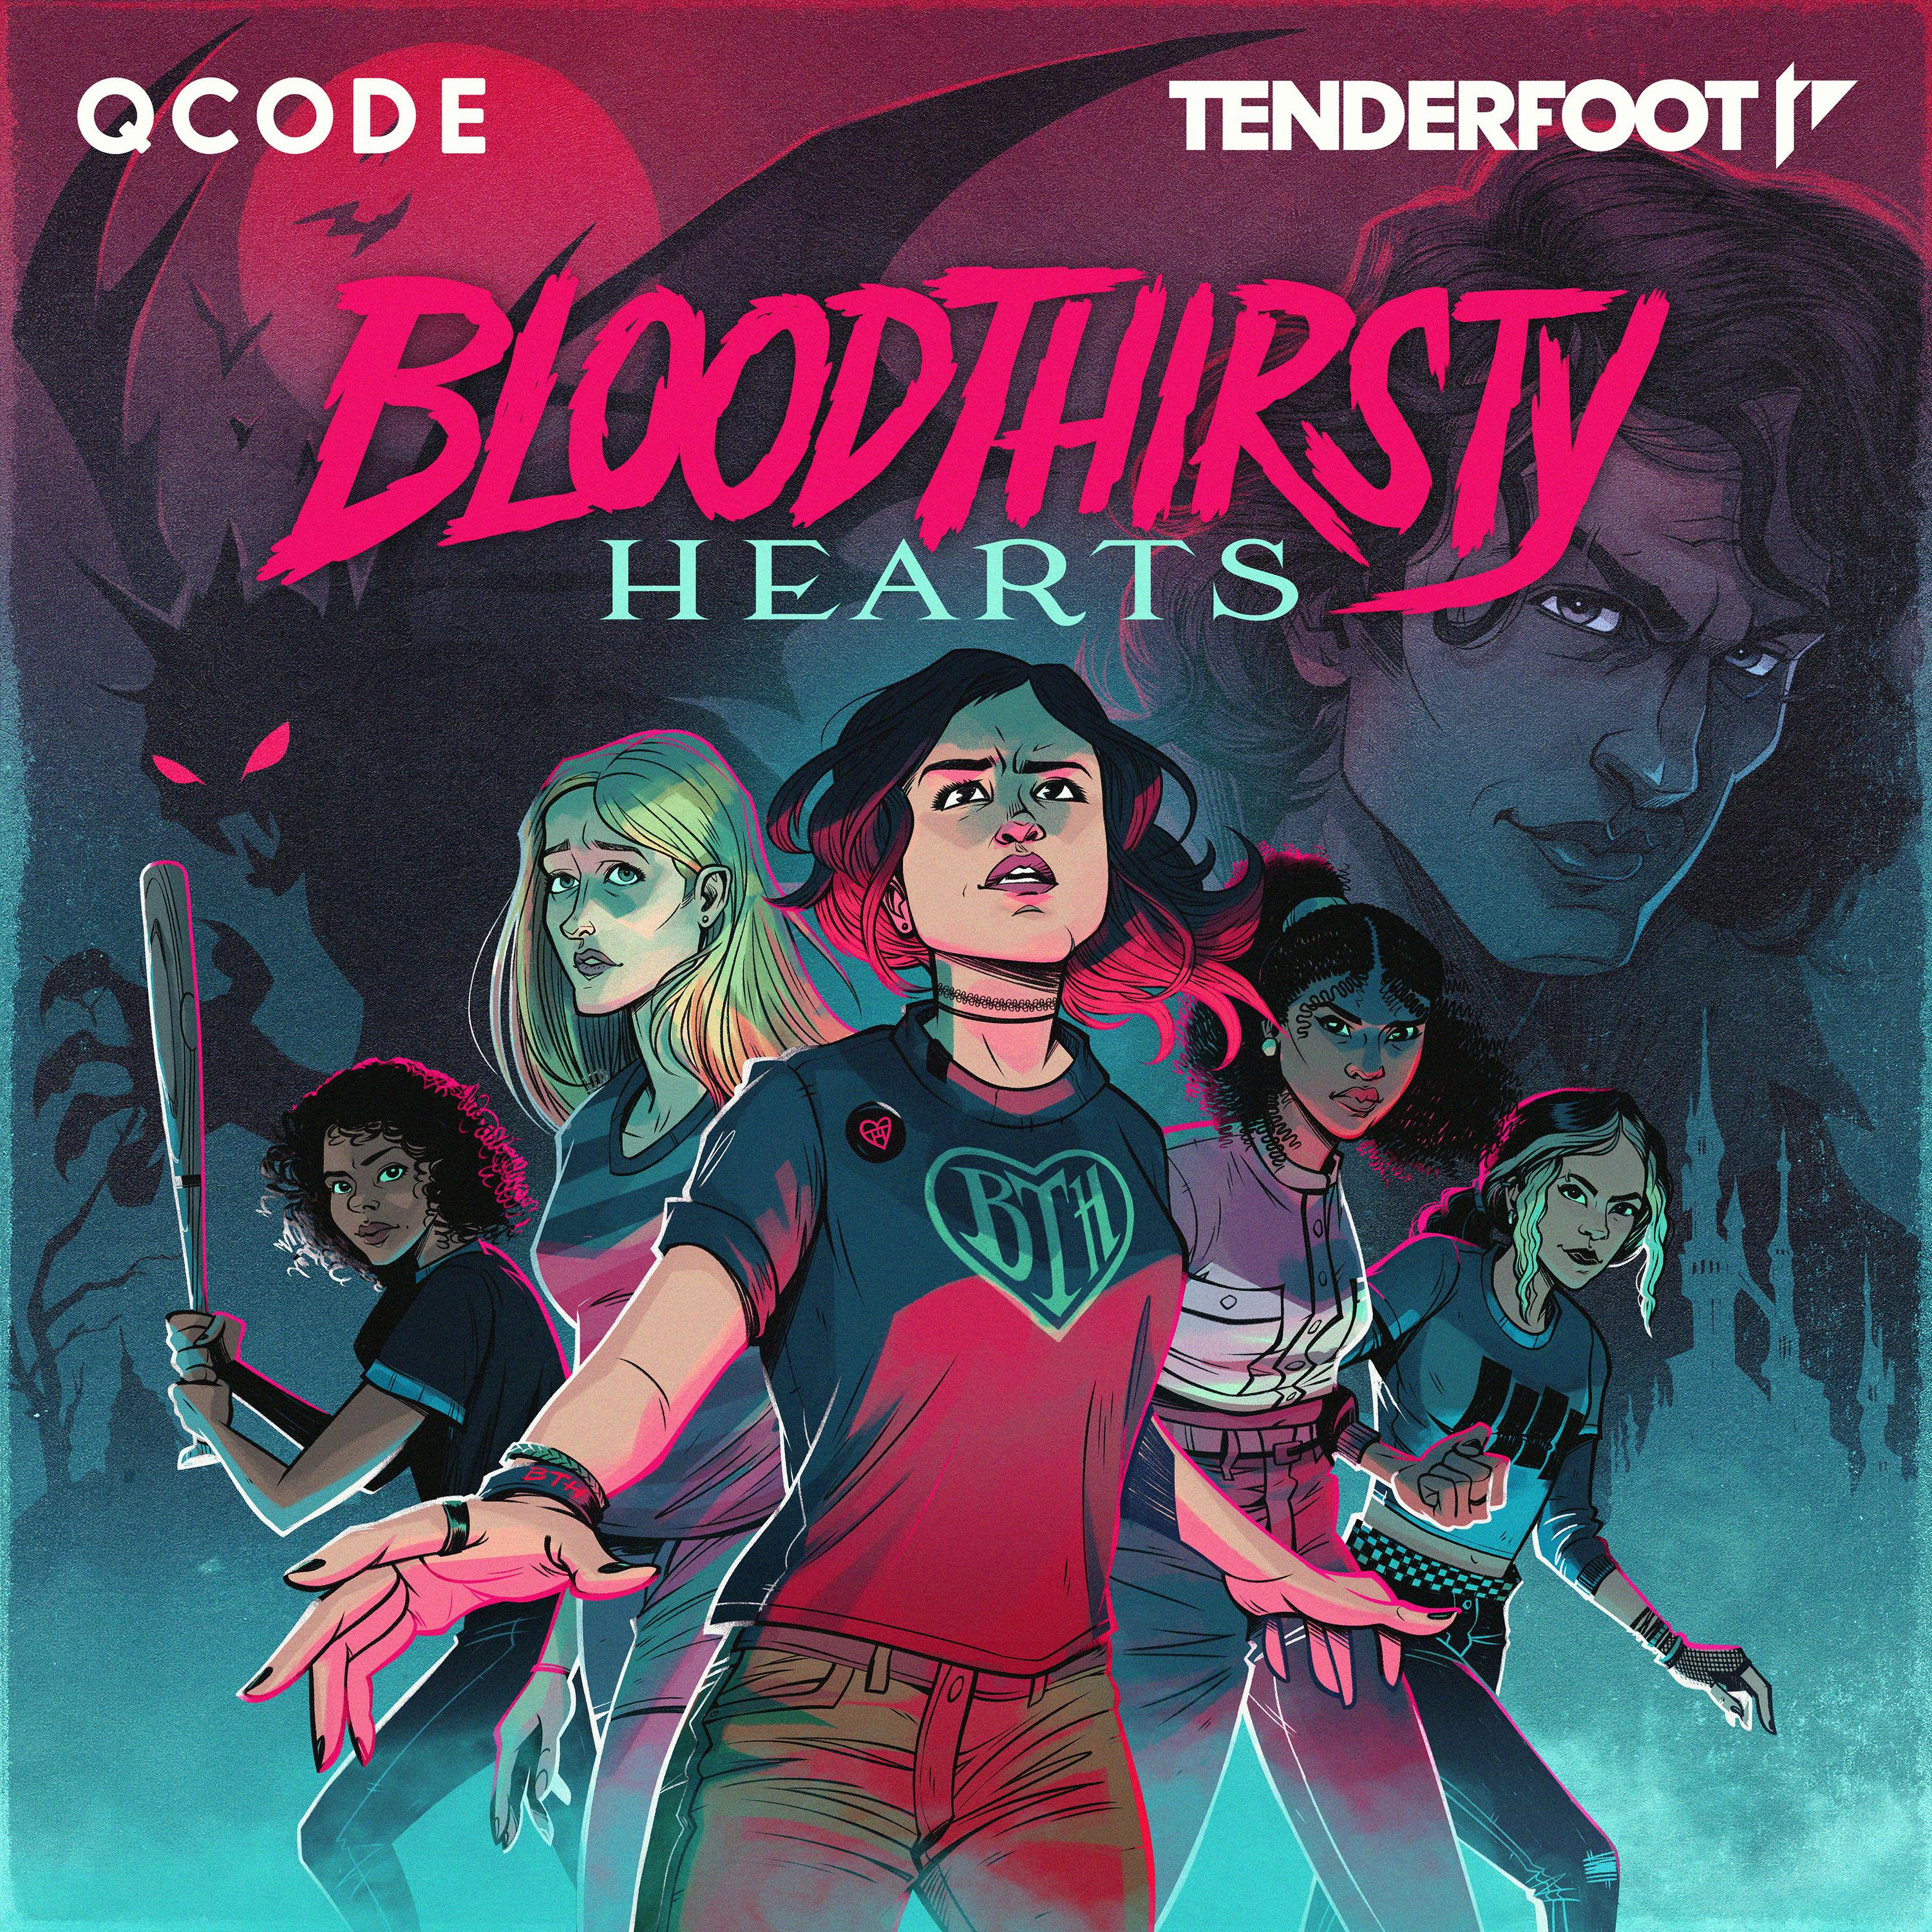 Bloodthirsty Hearts podcast show image